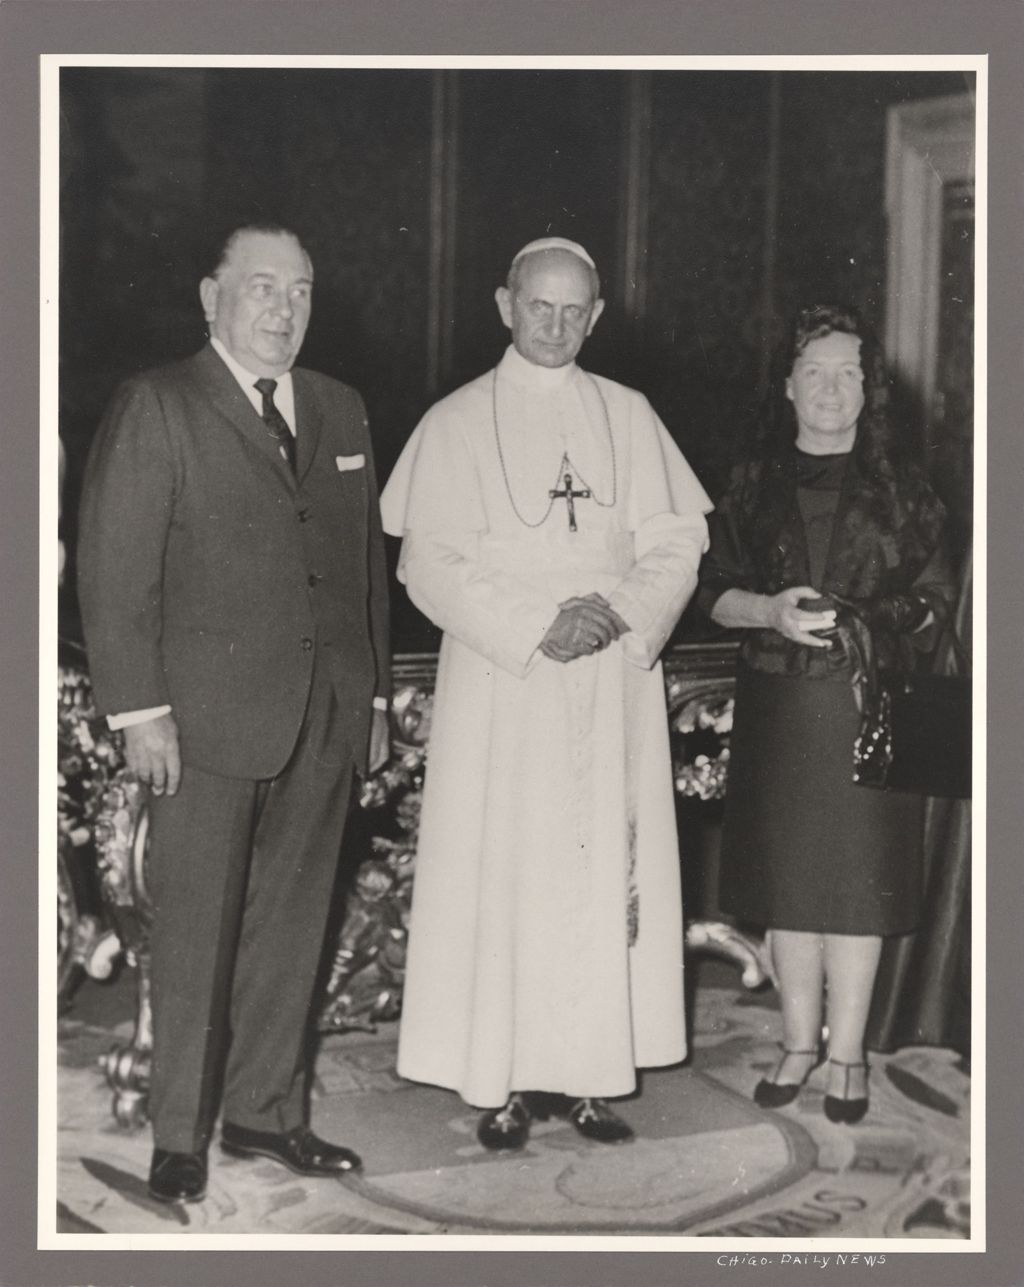 Richard J. Daley and Eleanor Daley with Pope Paul VI in Rome